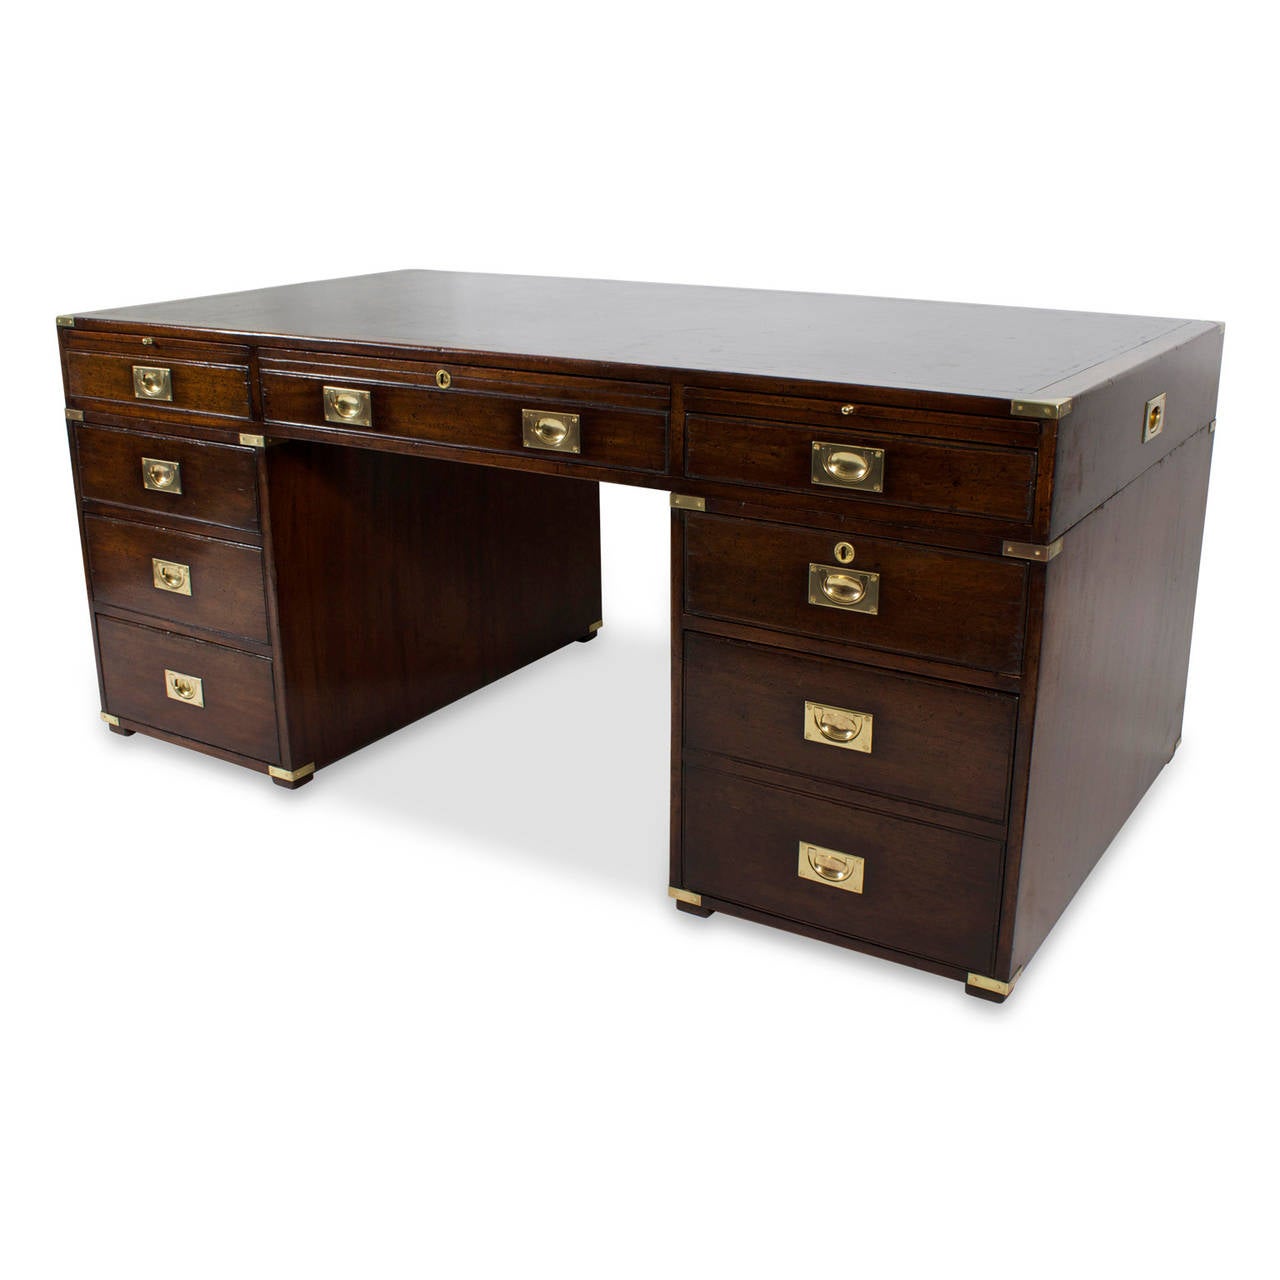 A vintage, English mahogany three-piece Campaign style desk, featuring bookshelves on the reverse, a tooled leather top with time-worn patina, original brass hardware, retractable trays, and nine storage drawers filled with history and secrets.